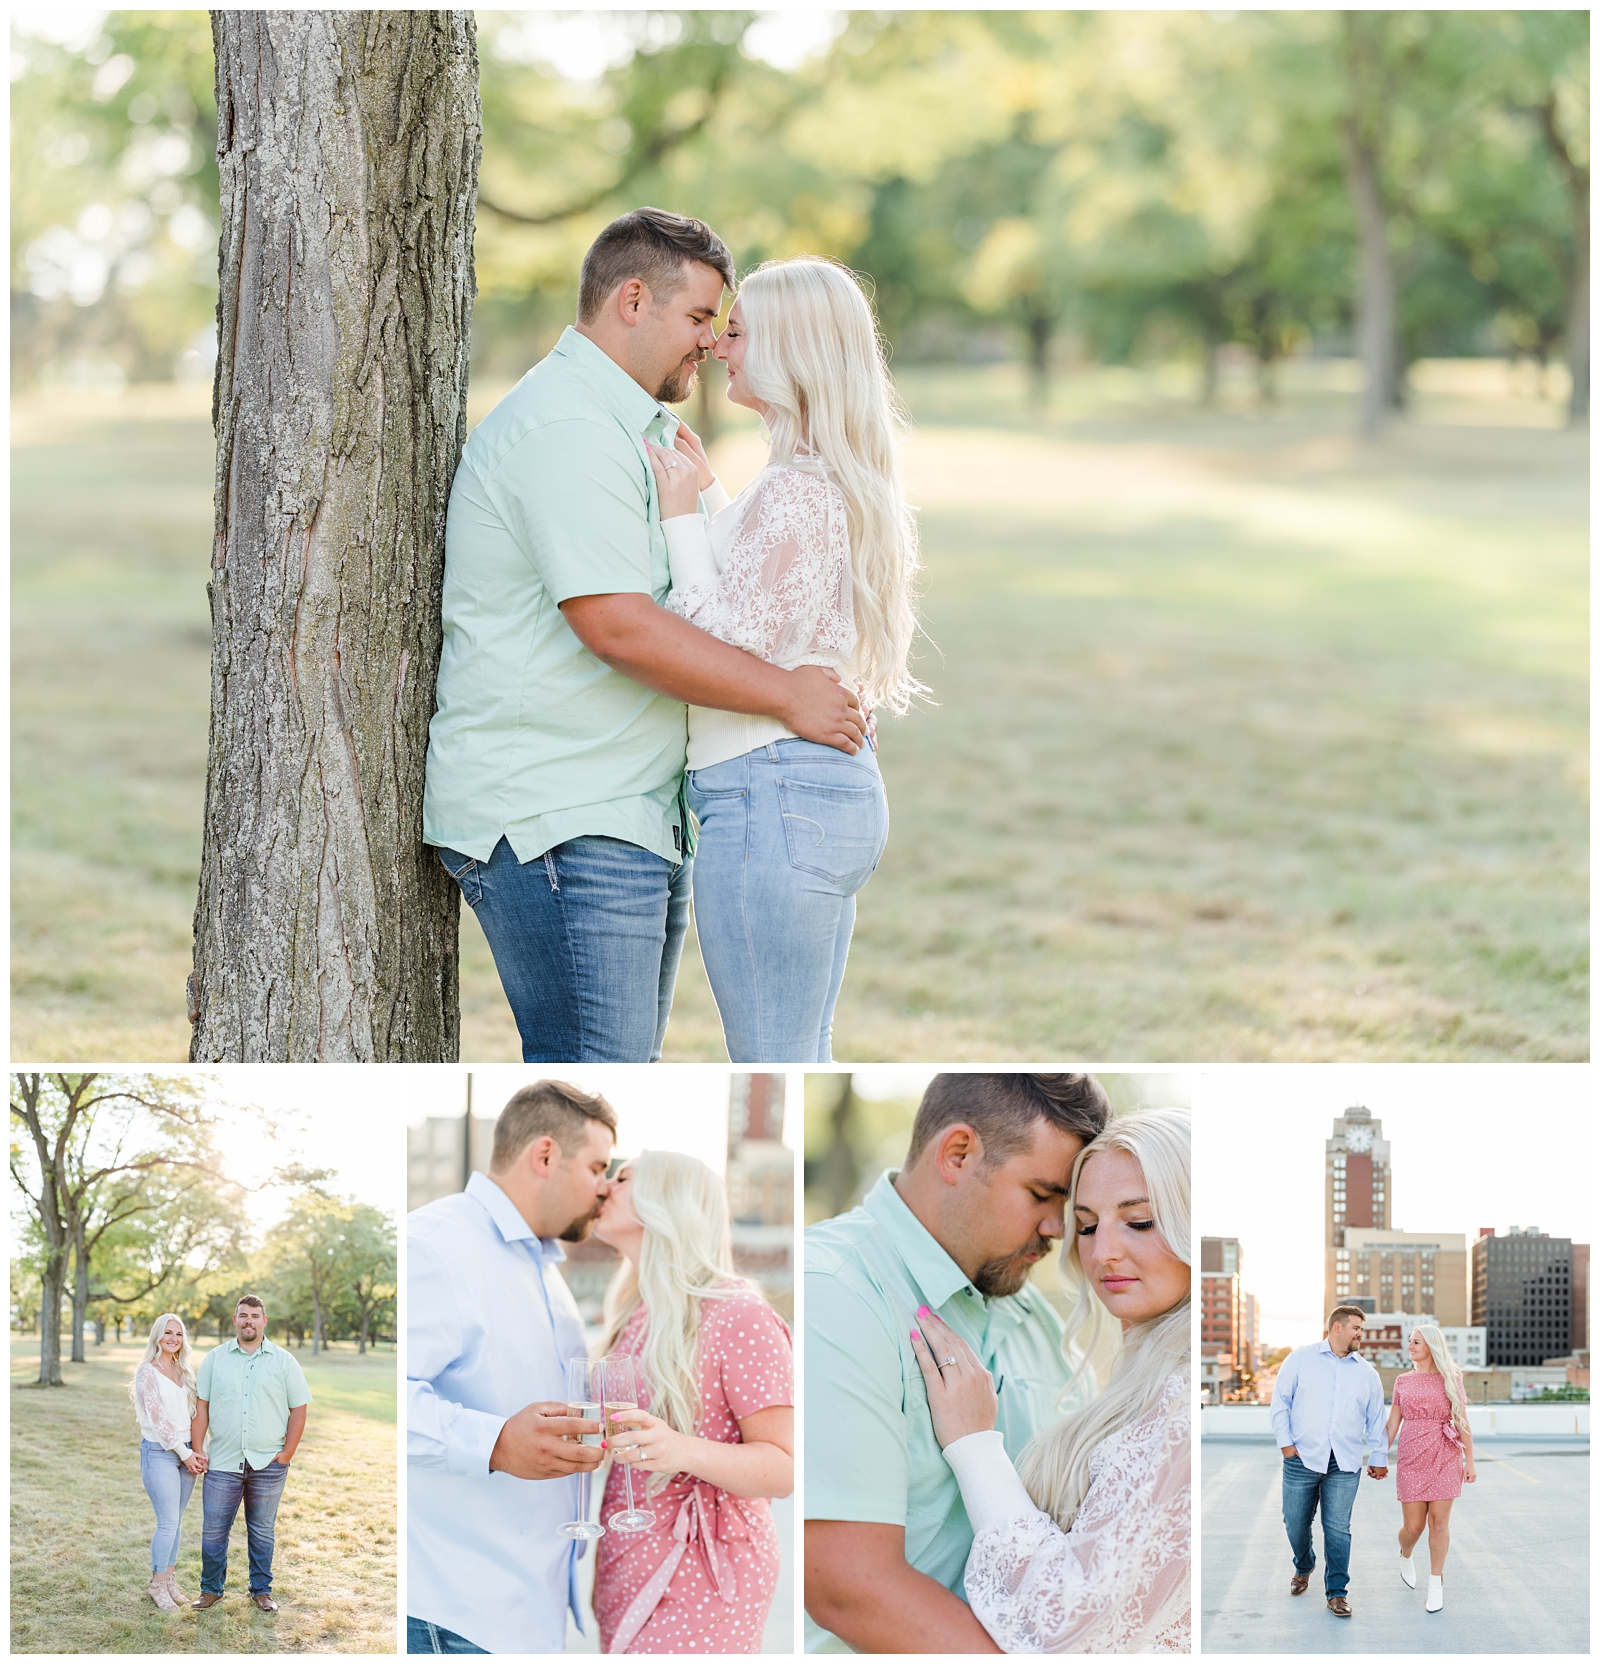 Engagement Session on College Campus